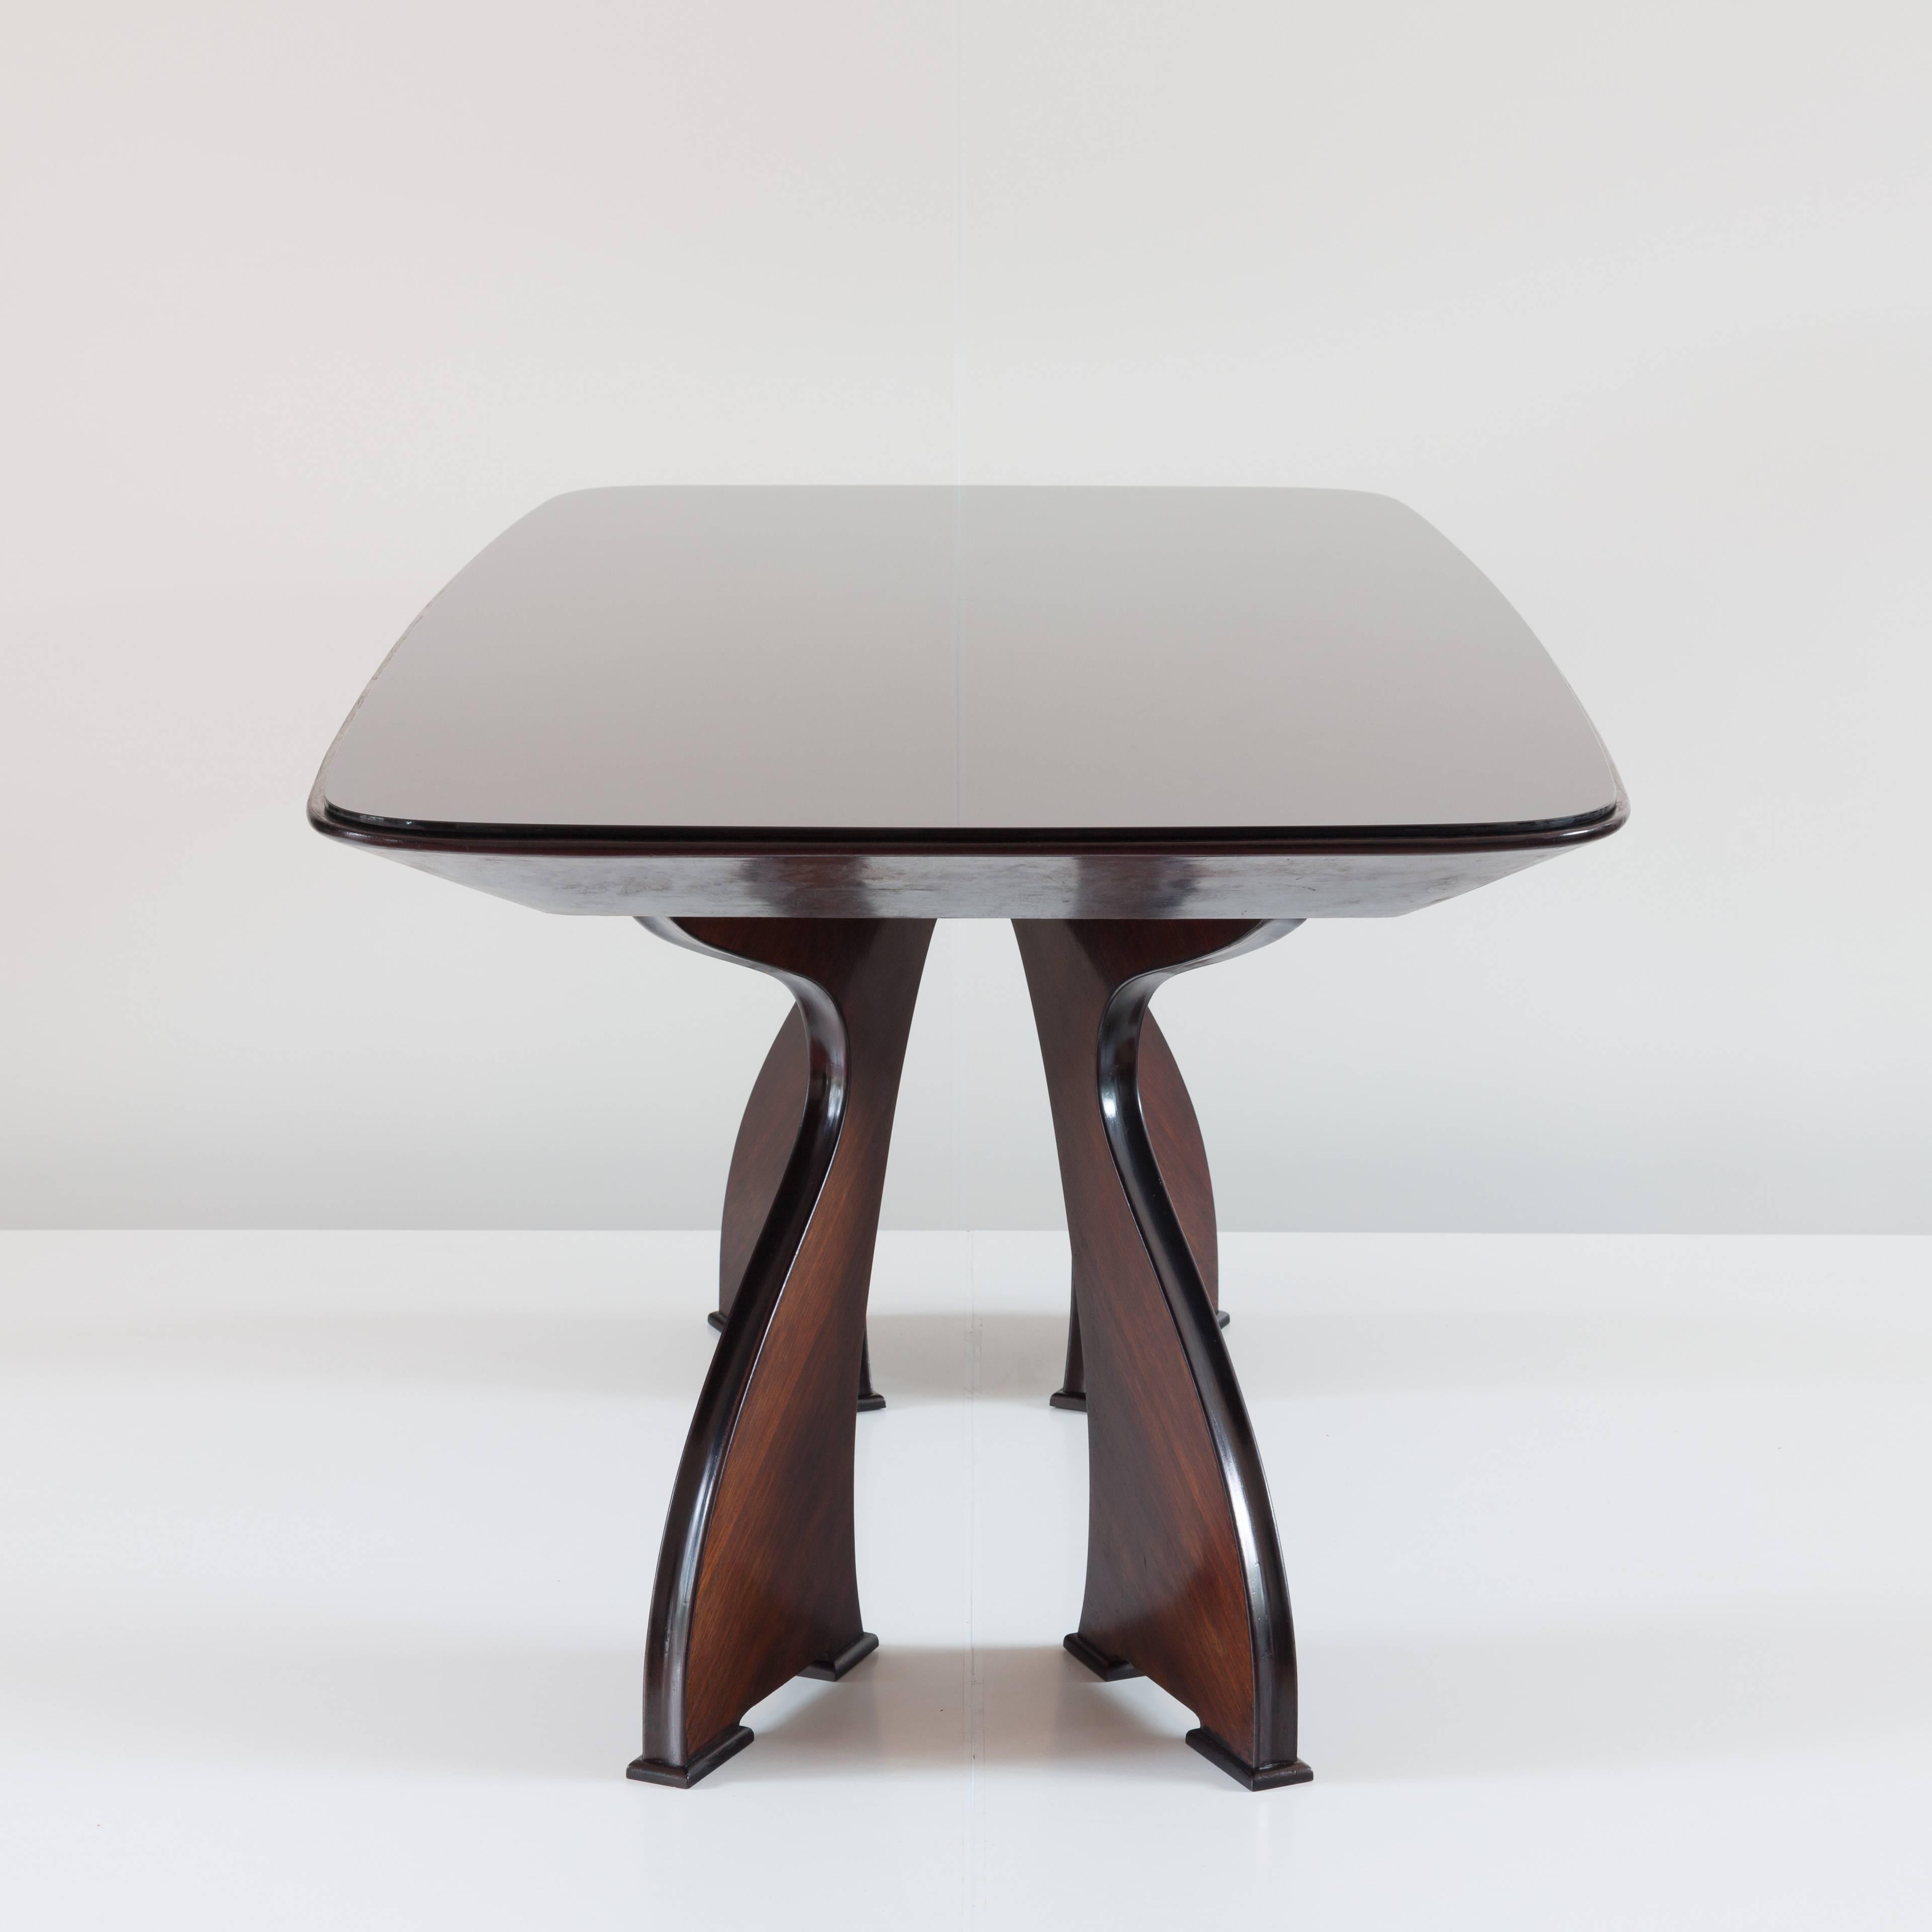 Mid-20th Century Stunning Italian Modern Rosewood and Black Opaline Glass Dining Table, 1940